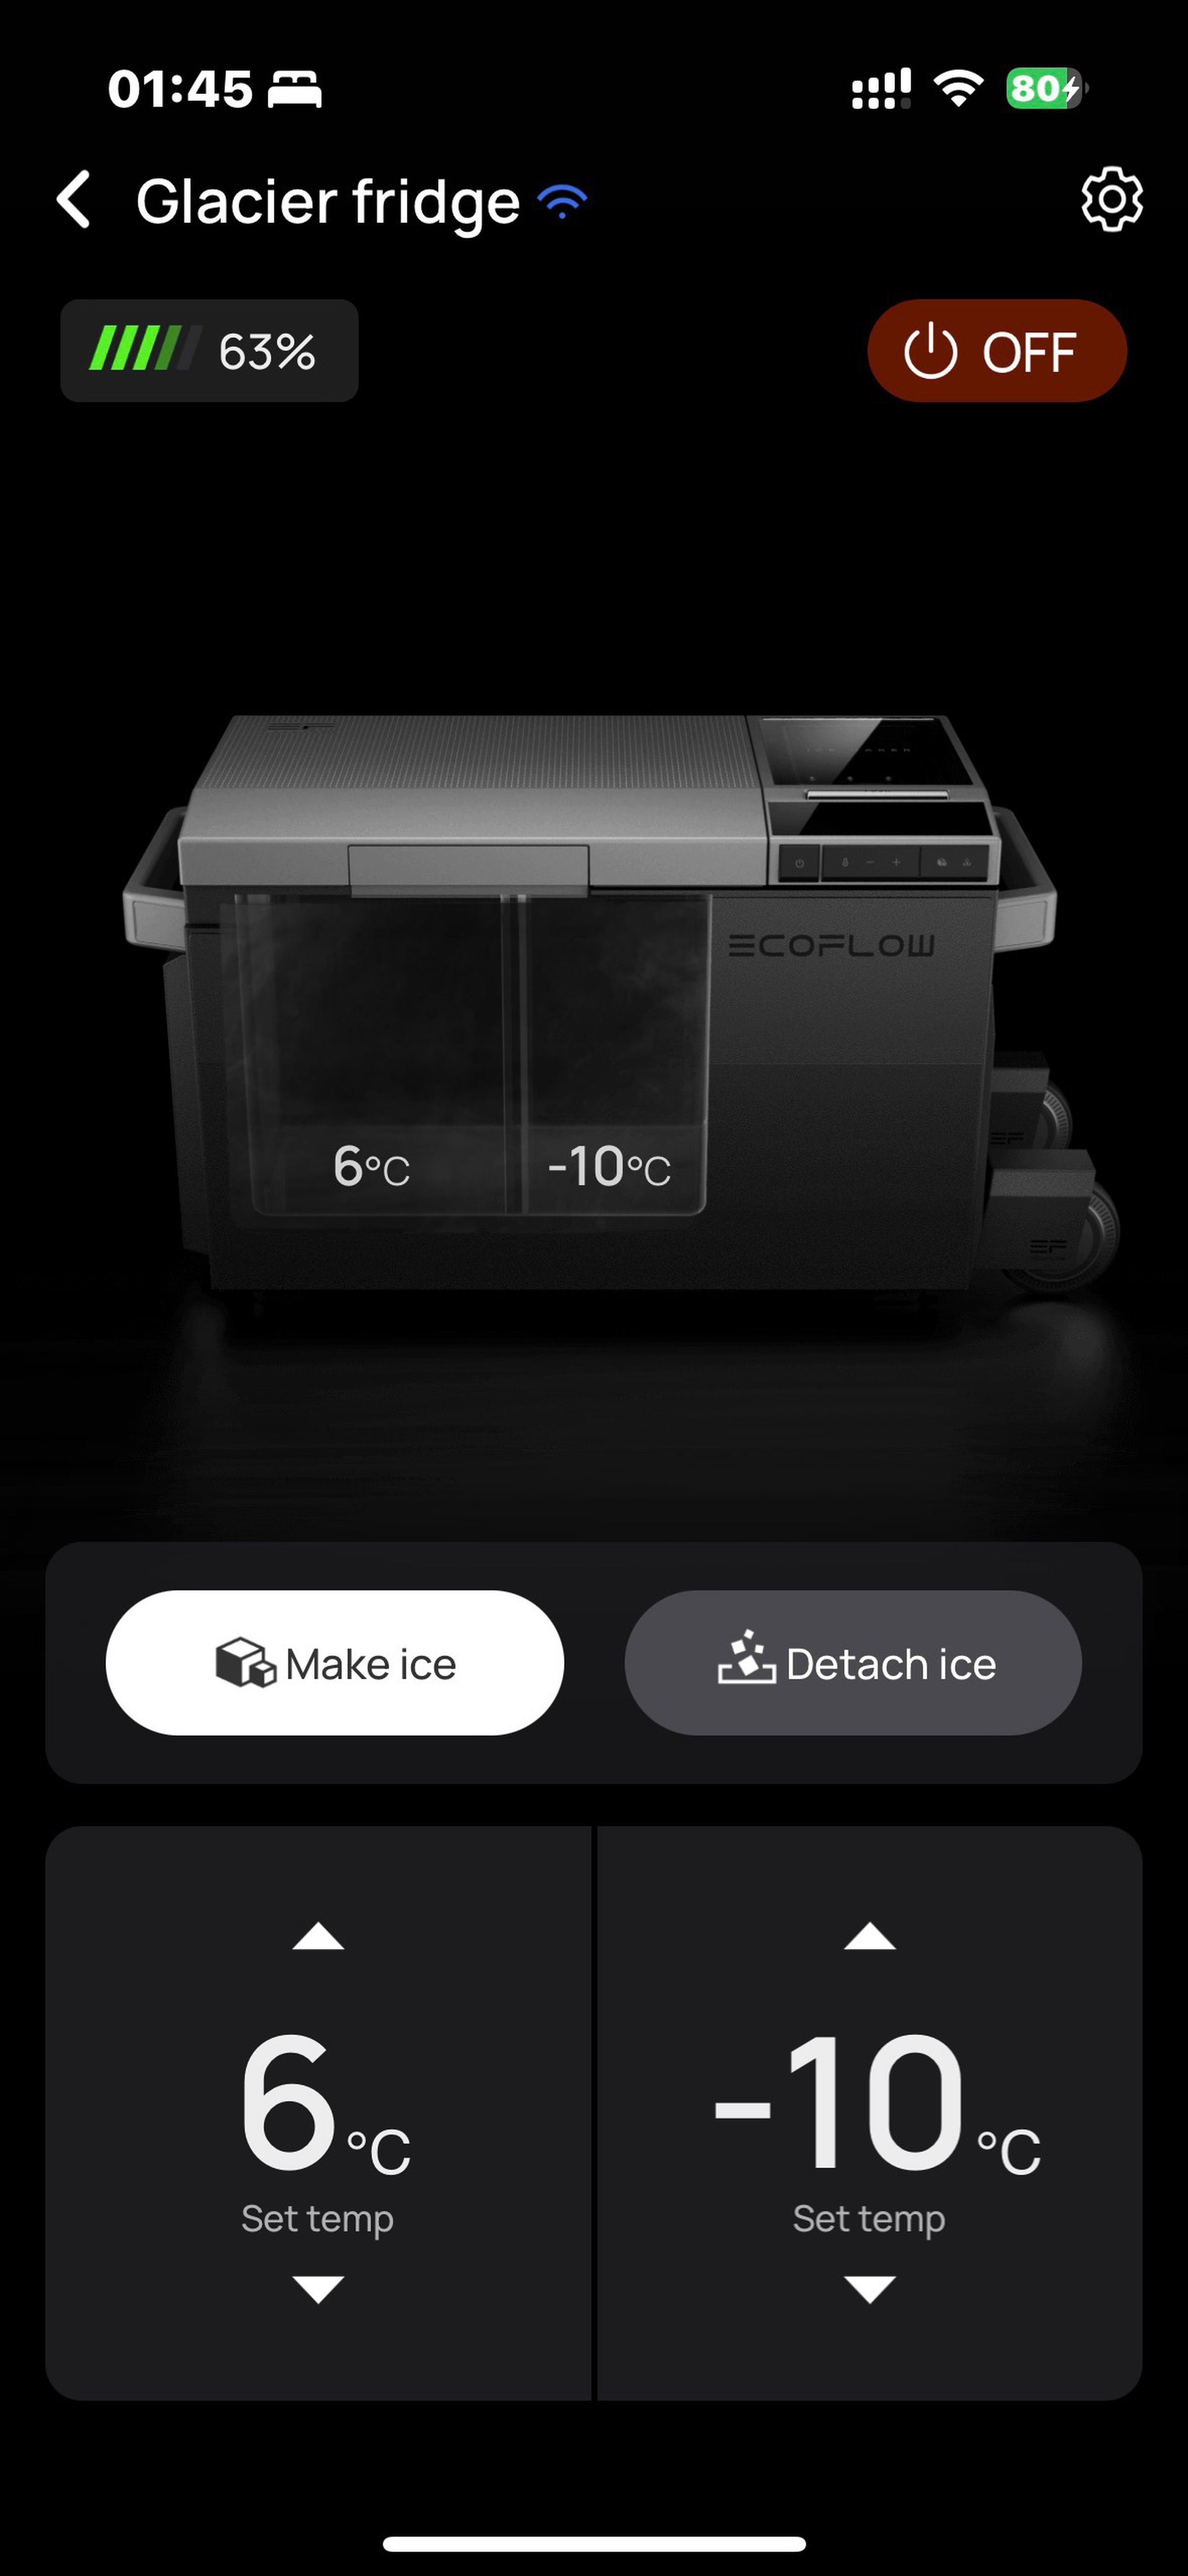 The excellent EcoFlow app clearly shows the two steps required to make ice, alongside desired and actual temperatures, and battery power remaining.